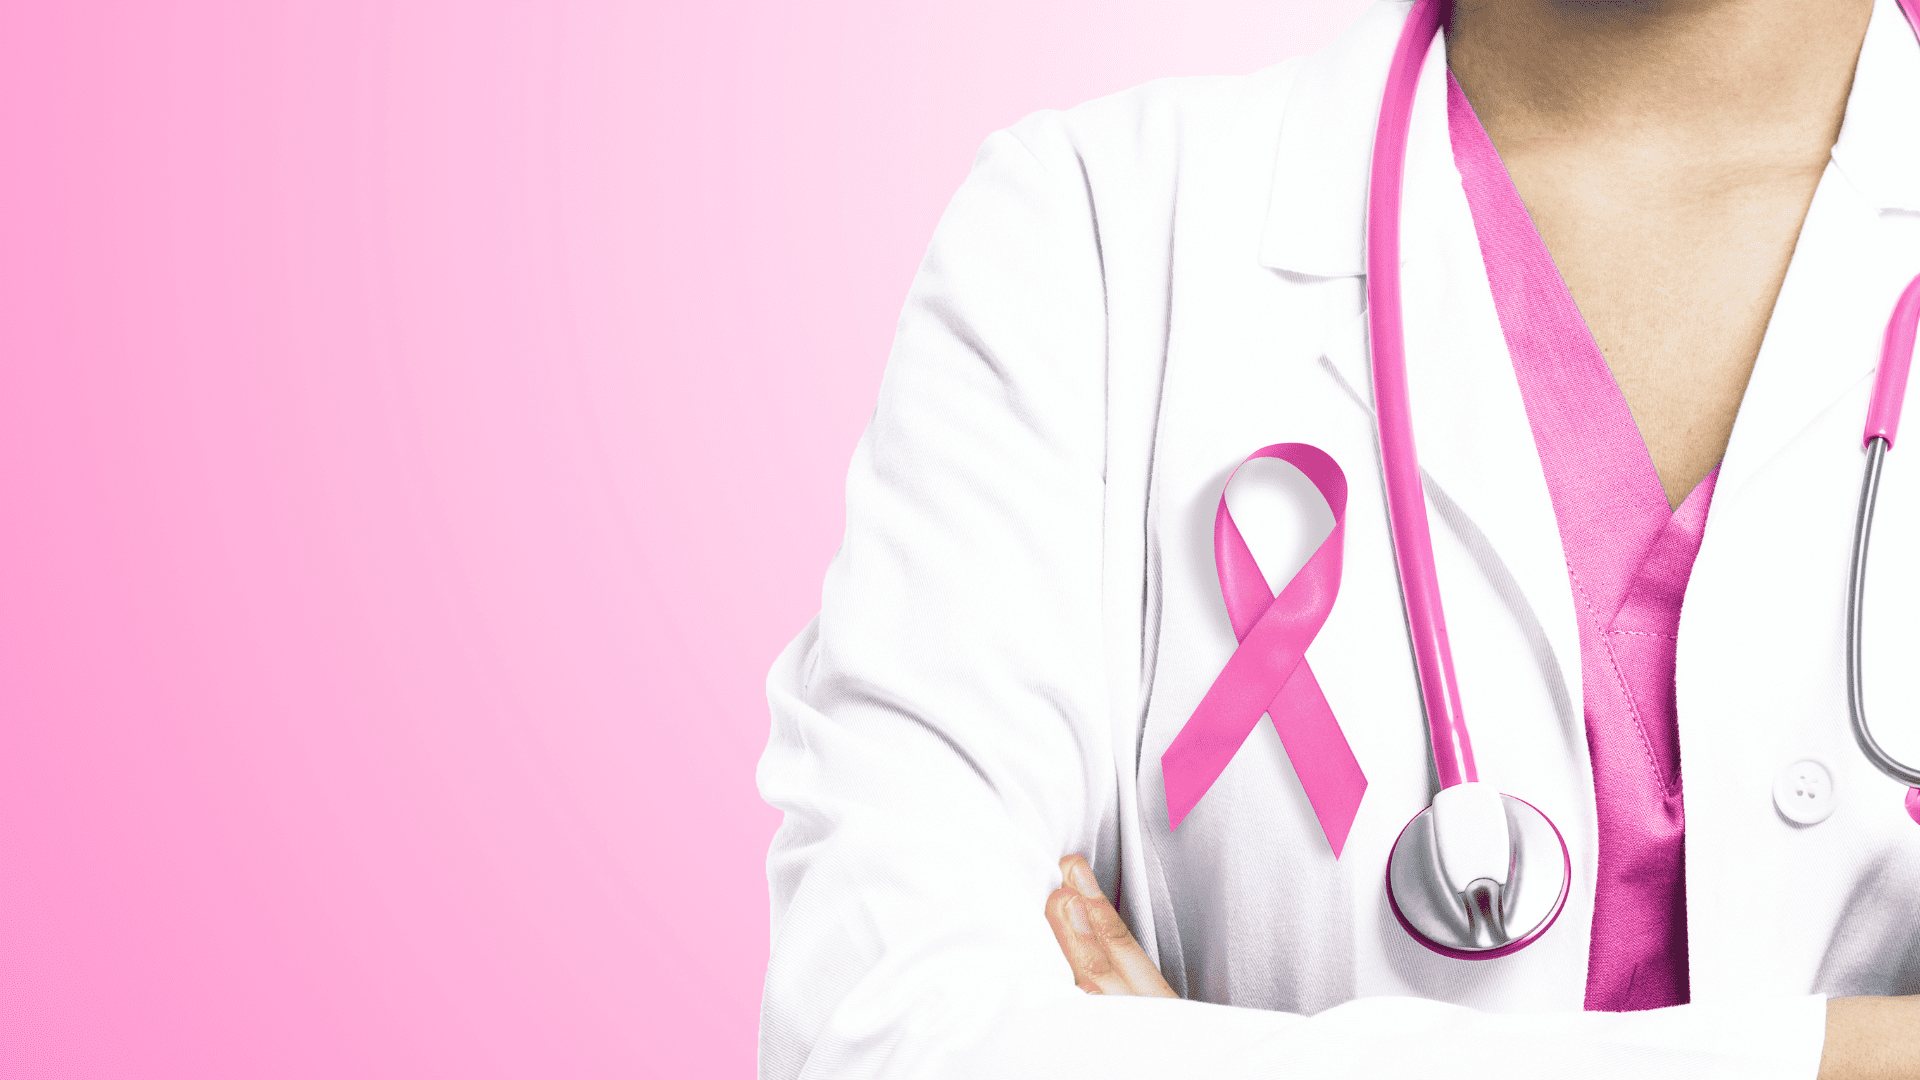 Featured image for “Breast Cancer”